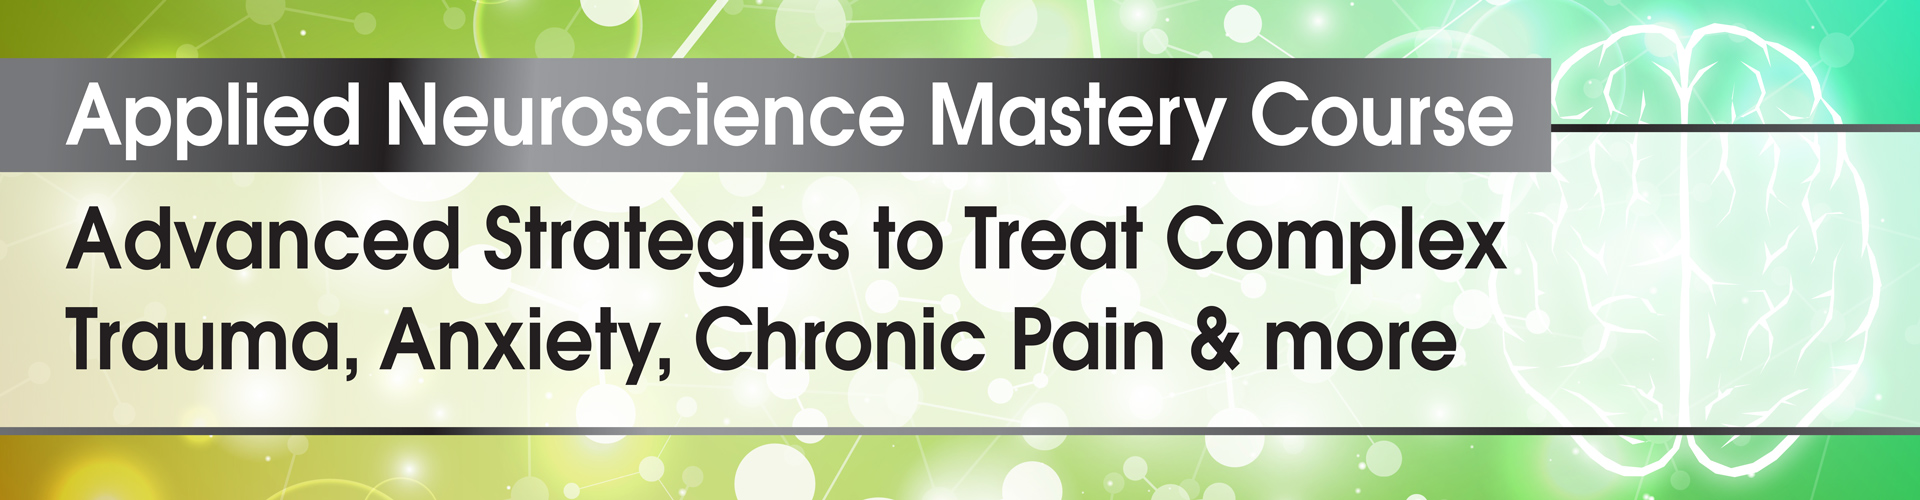 Applied Neuroscience Mastery CourseAdvanced Strategies to Treat Complex Trauma, Anxiety, Chronic Pain & more